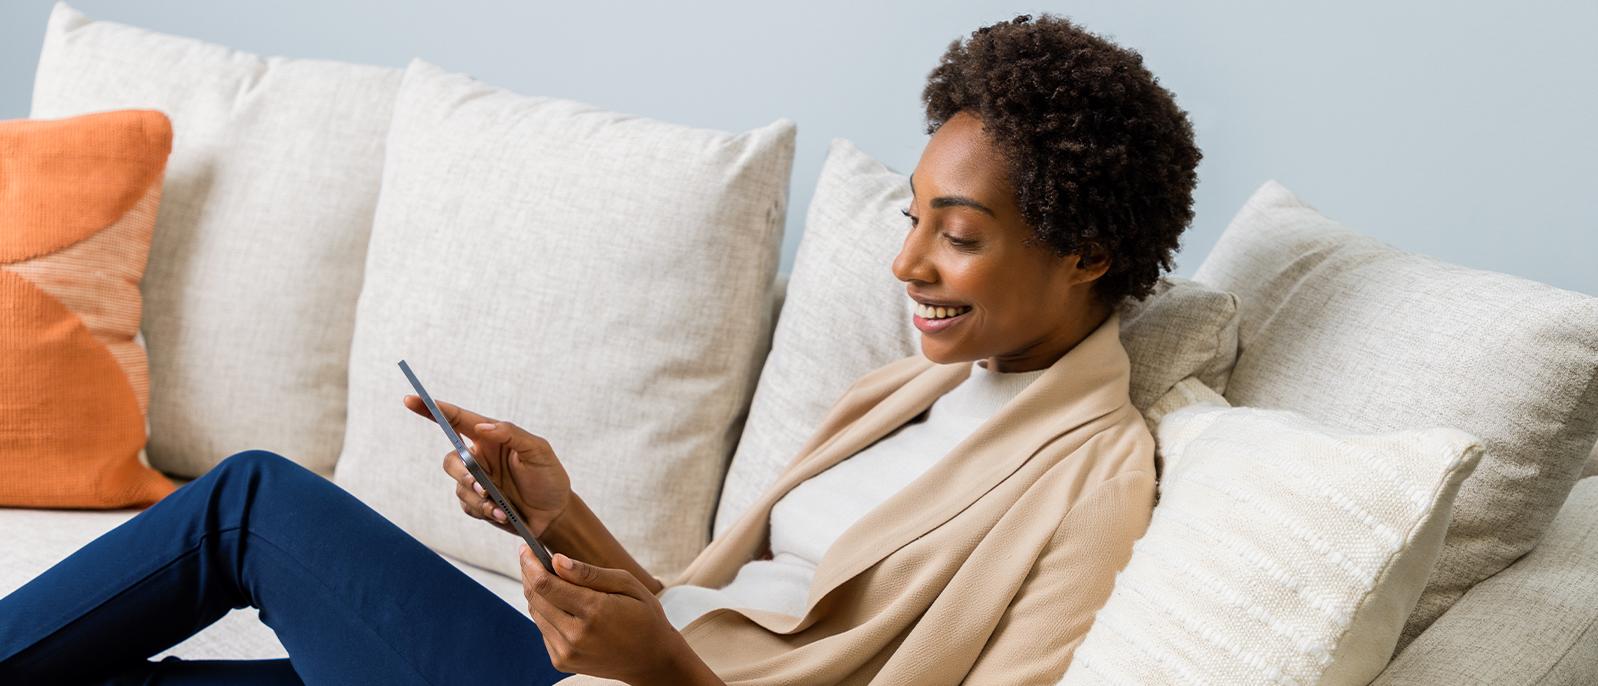 Woman on couch shopping on a tablet